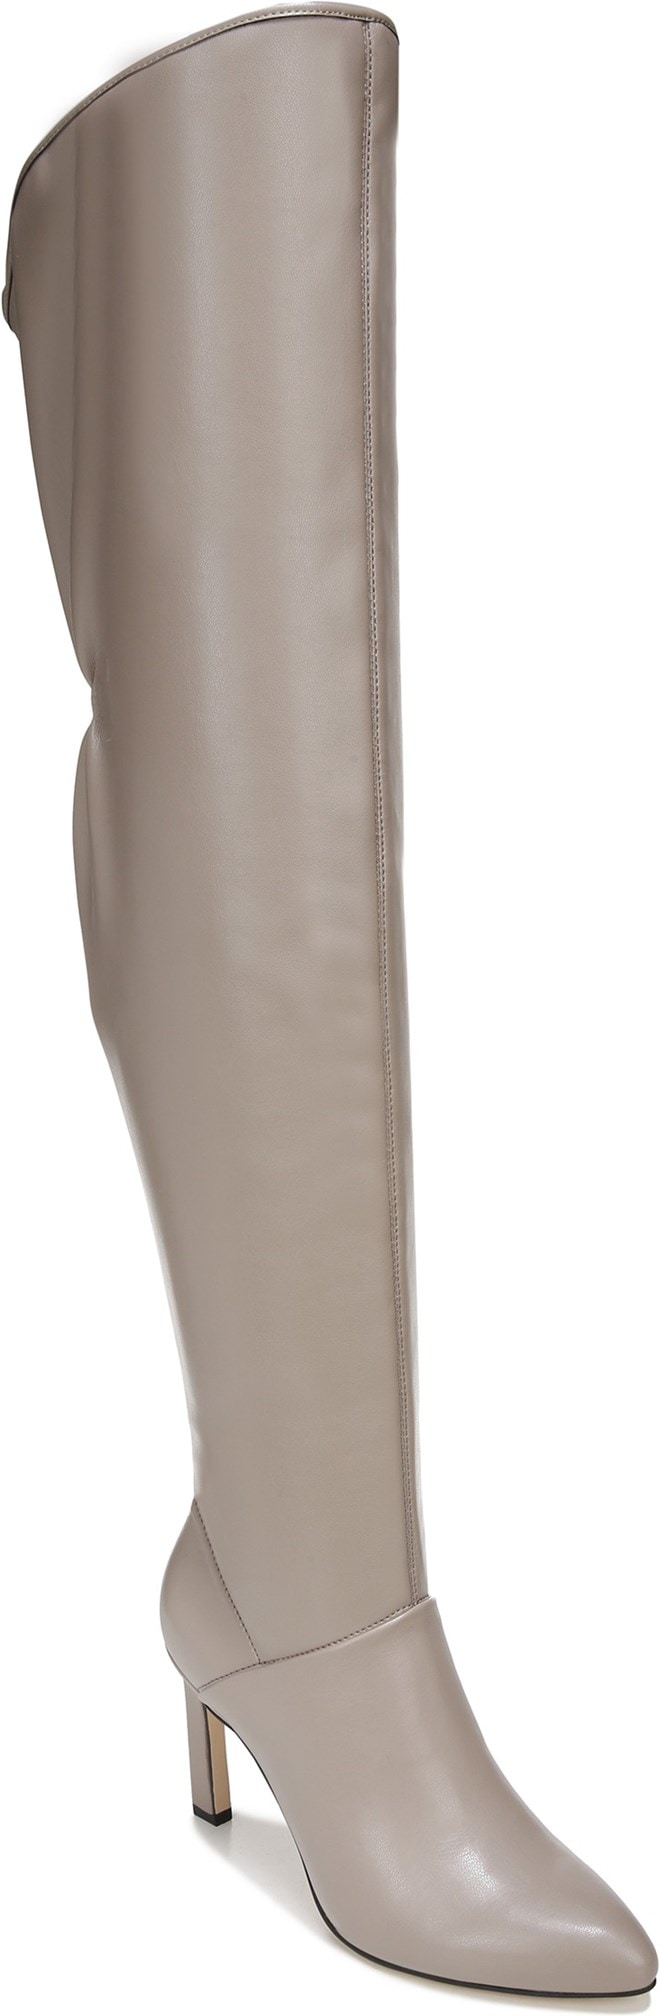 Womens Shoes Boots Over-the-knee boots Save 2% Franco Sarto Chiffon Callie2 Over The Knee Boot in White 